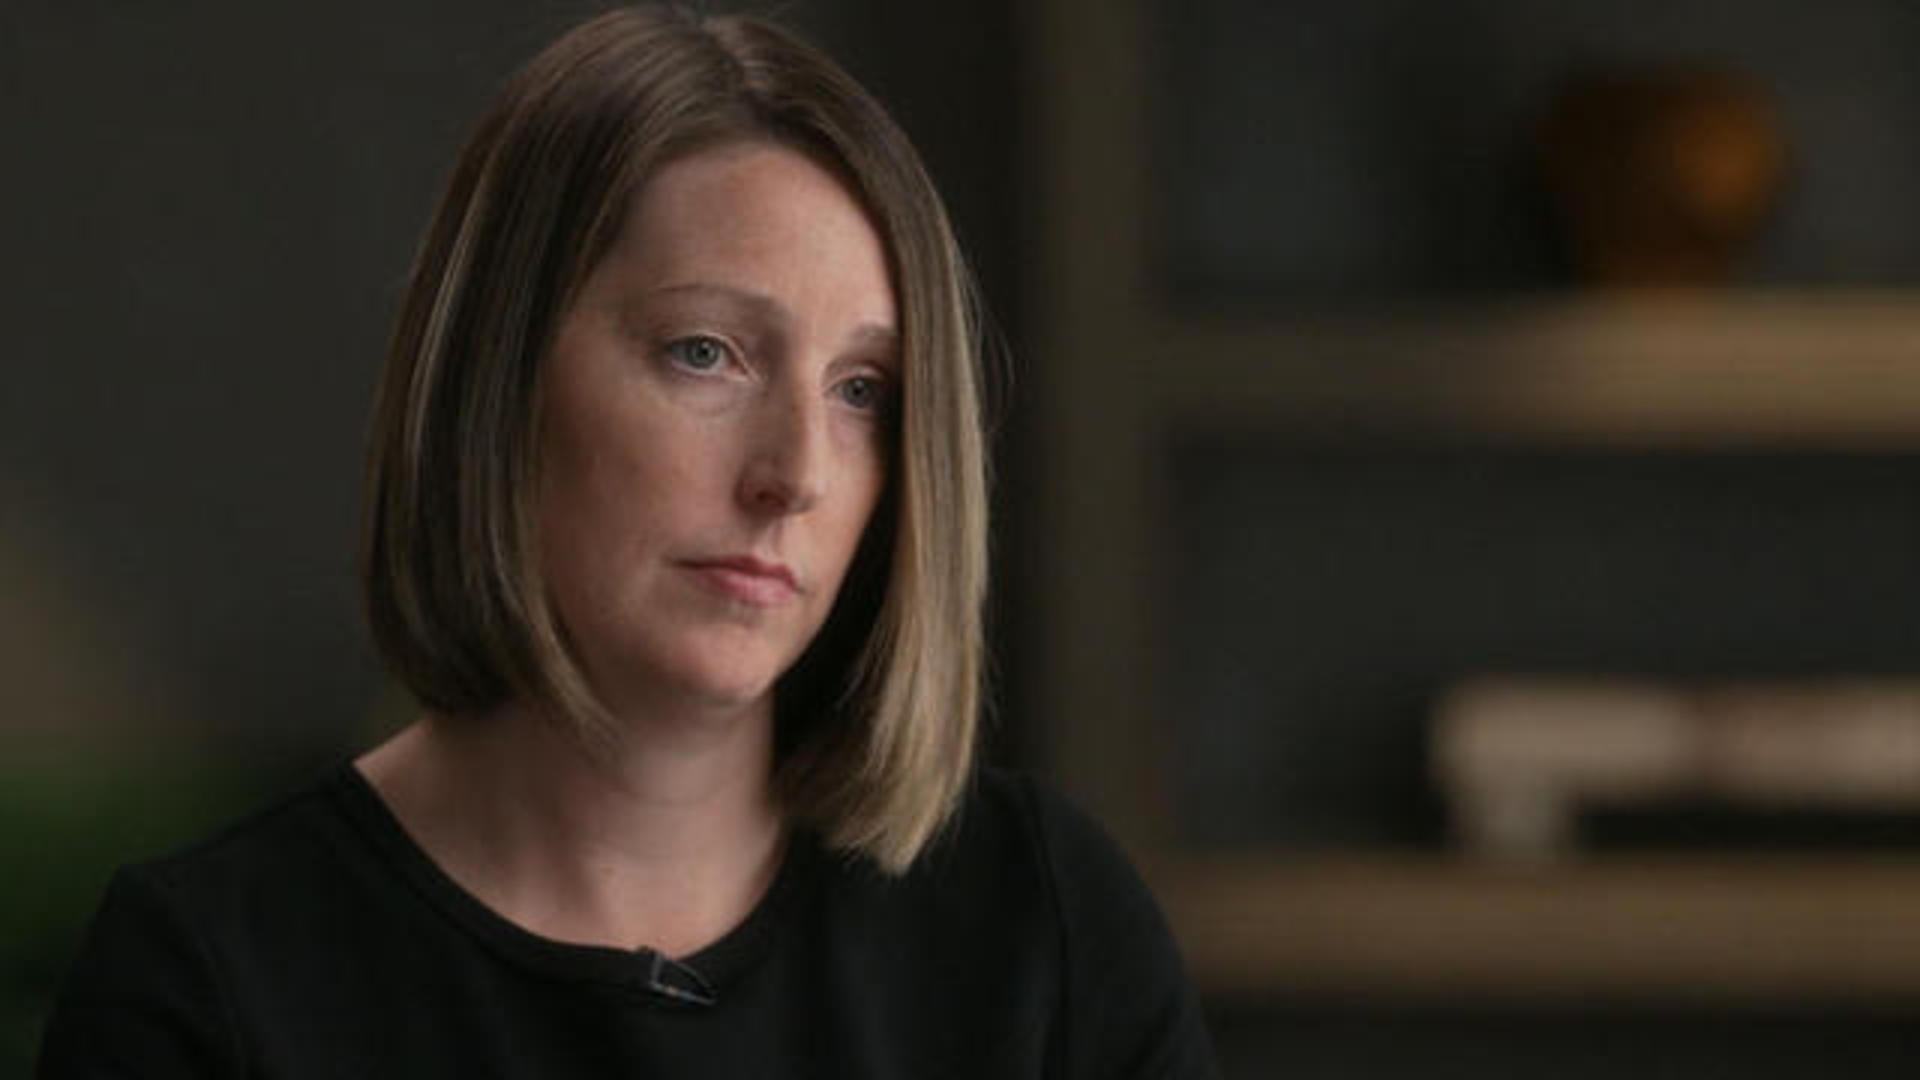 Beautiful Girl And Doctor Raped Solo Videos - Dr. Caitlin Bernard, doctor at the center of abortion debate, speaks out to  CBS News - CBS News